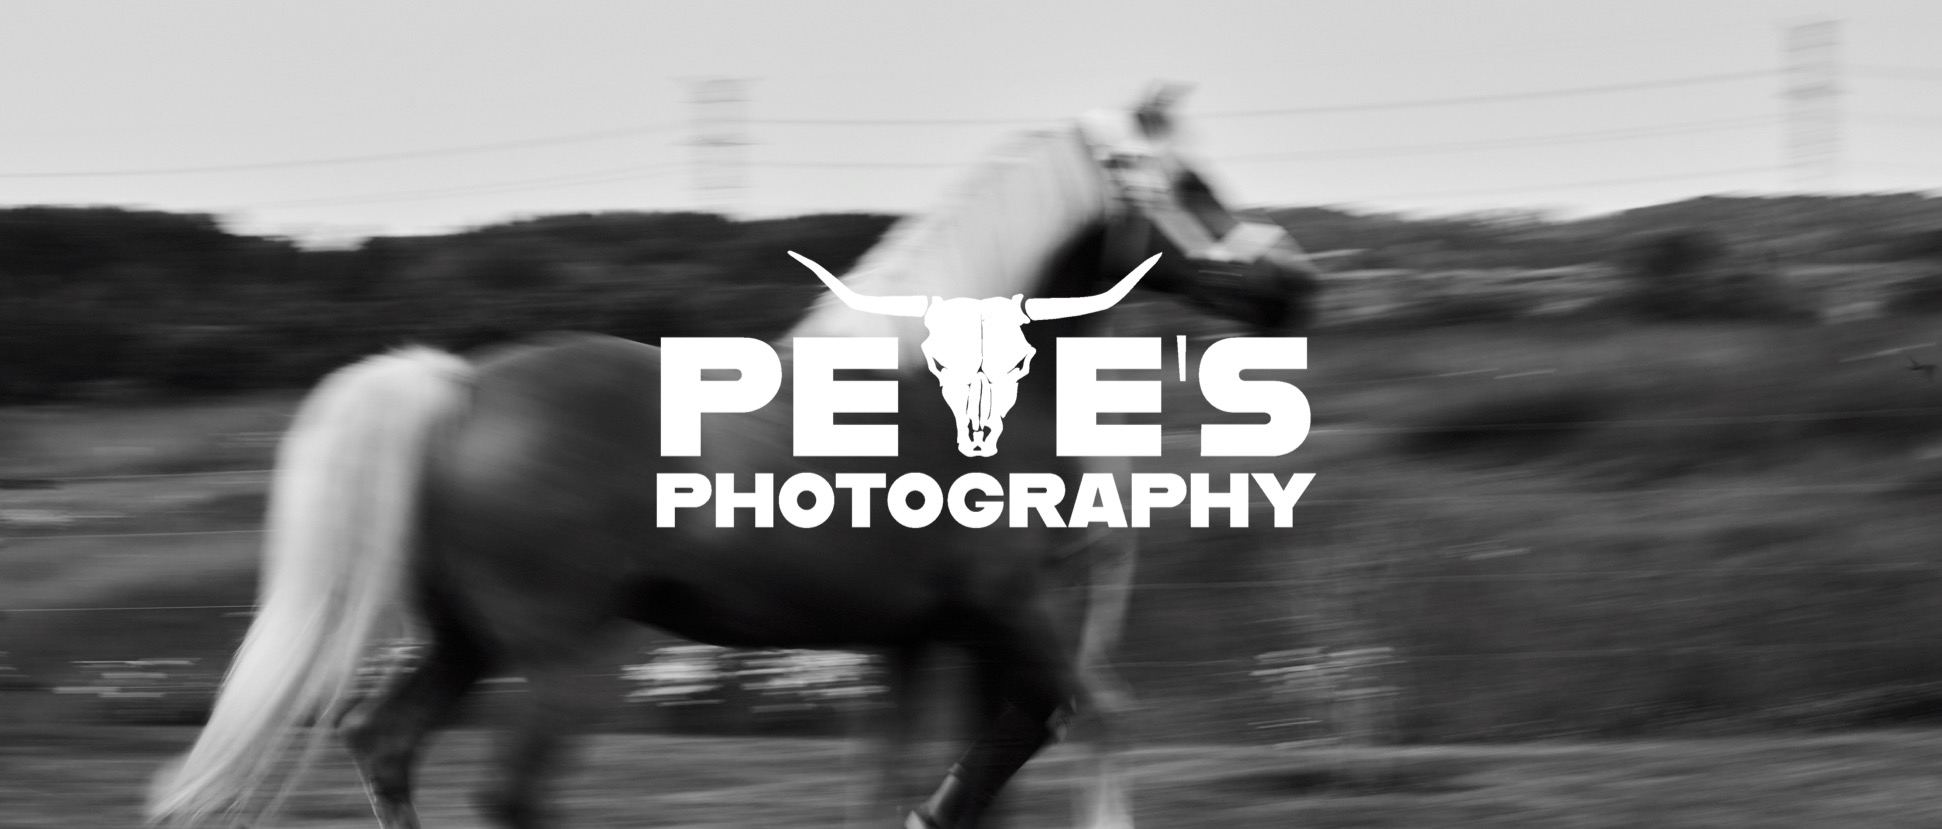 Pete's Photography - Equine Clydesdale Drafthorses Photographer - Ontario Canada